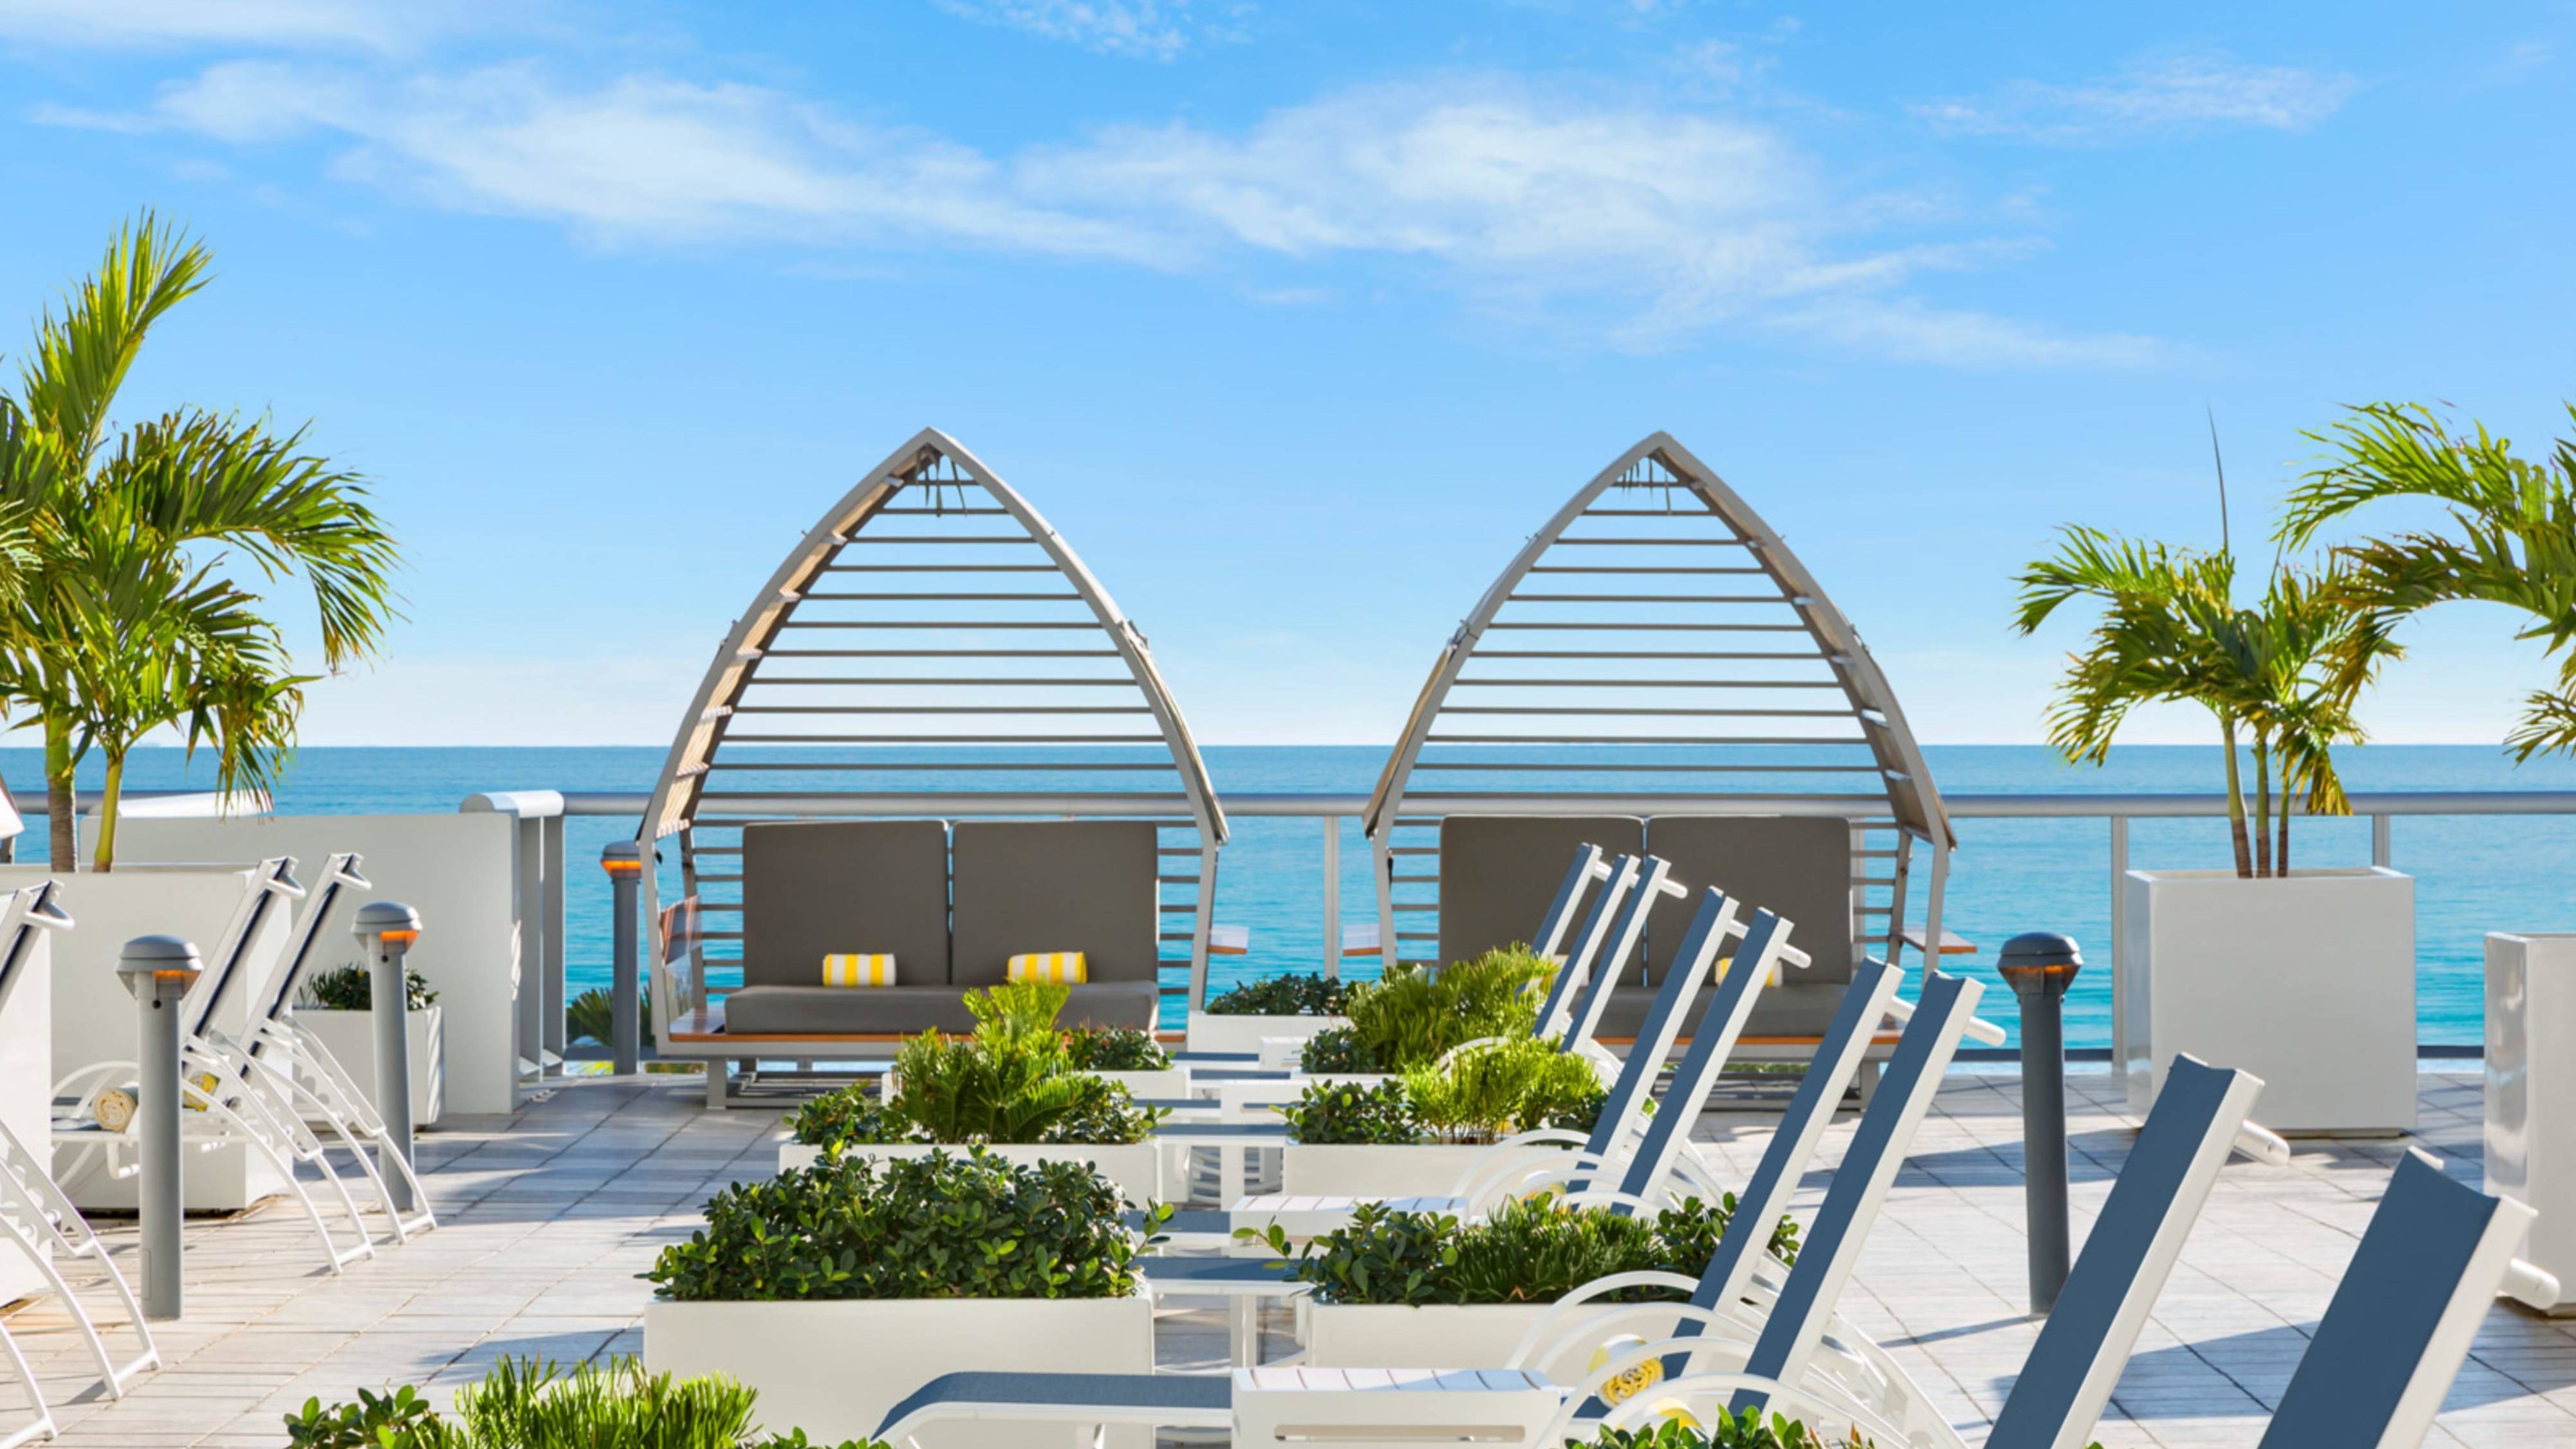 Lounge chairs and cabanas with view of ocean